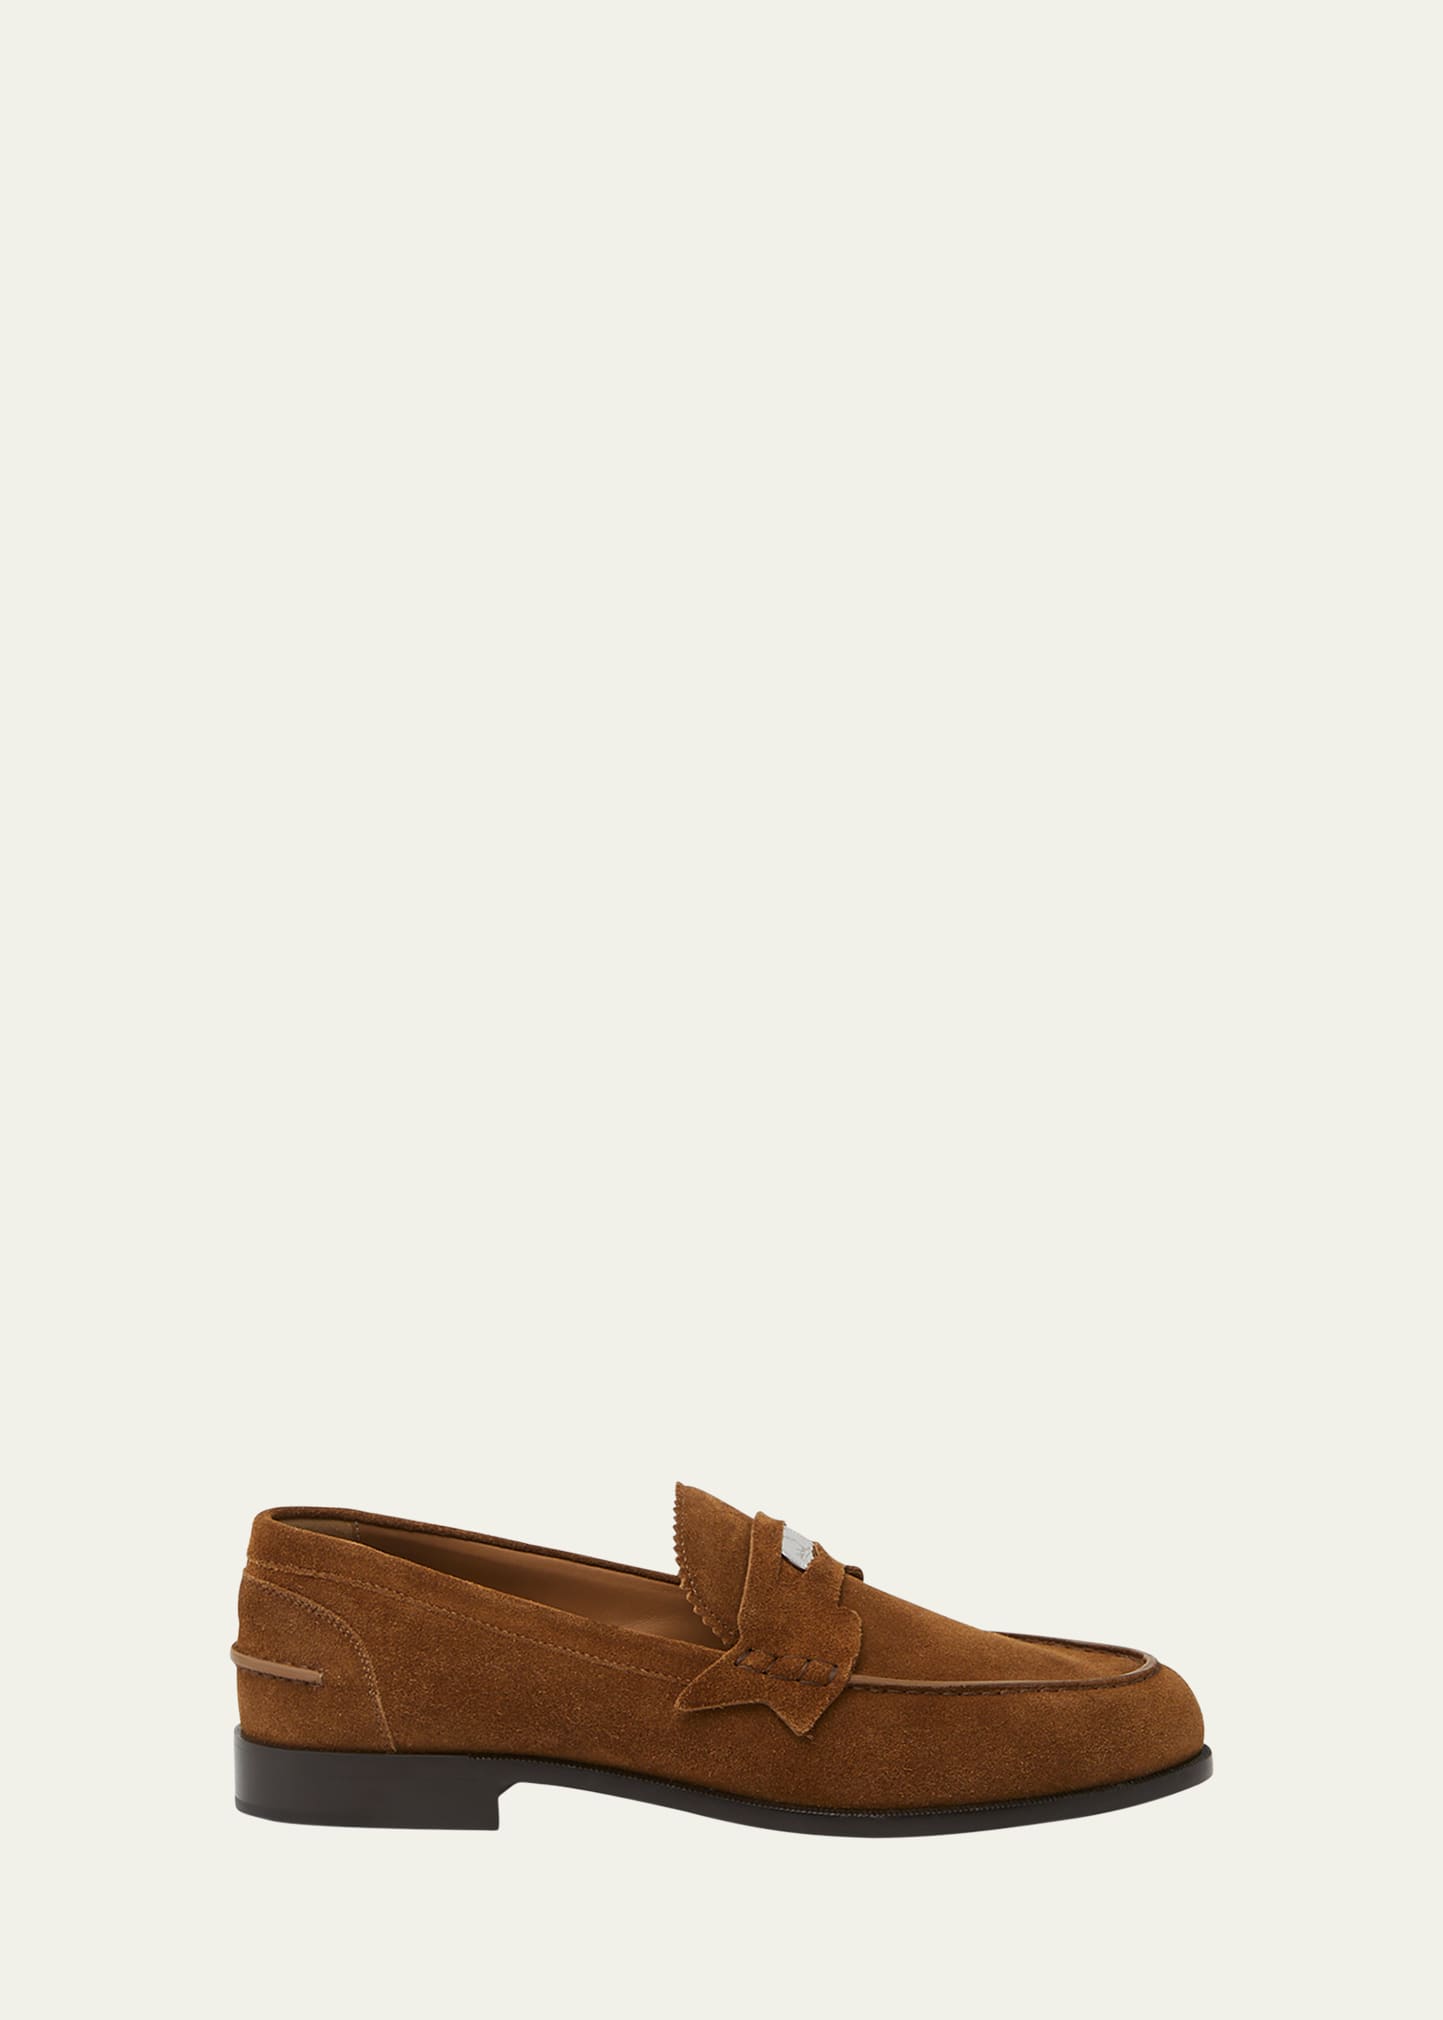 Shop Christian Louboutin Men's Penny Leather Penny Loafers In Rhea